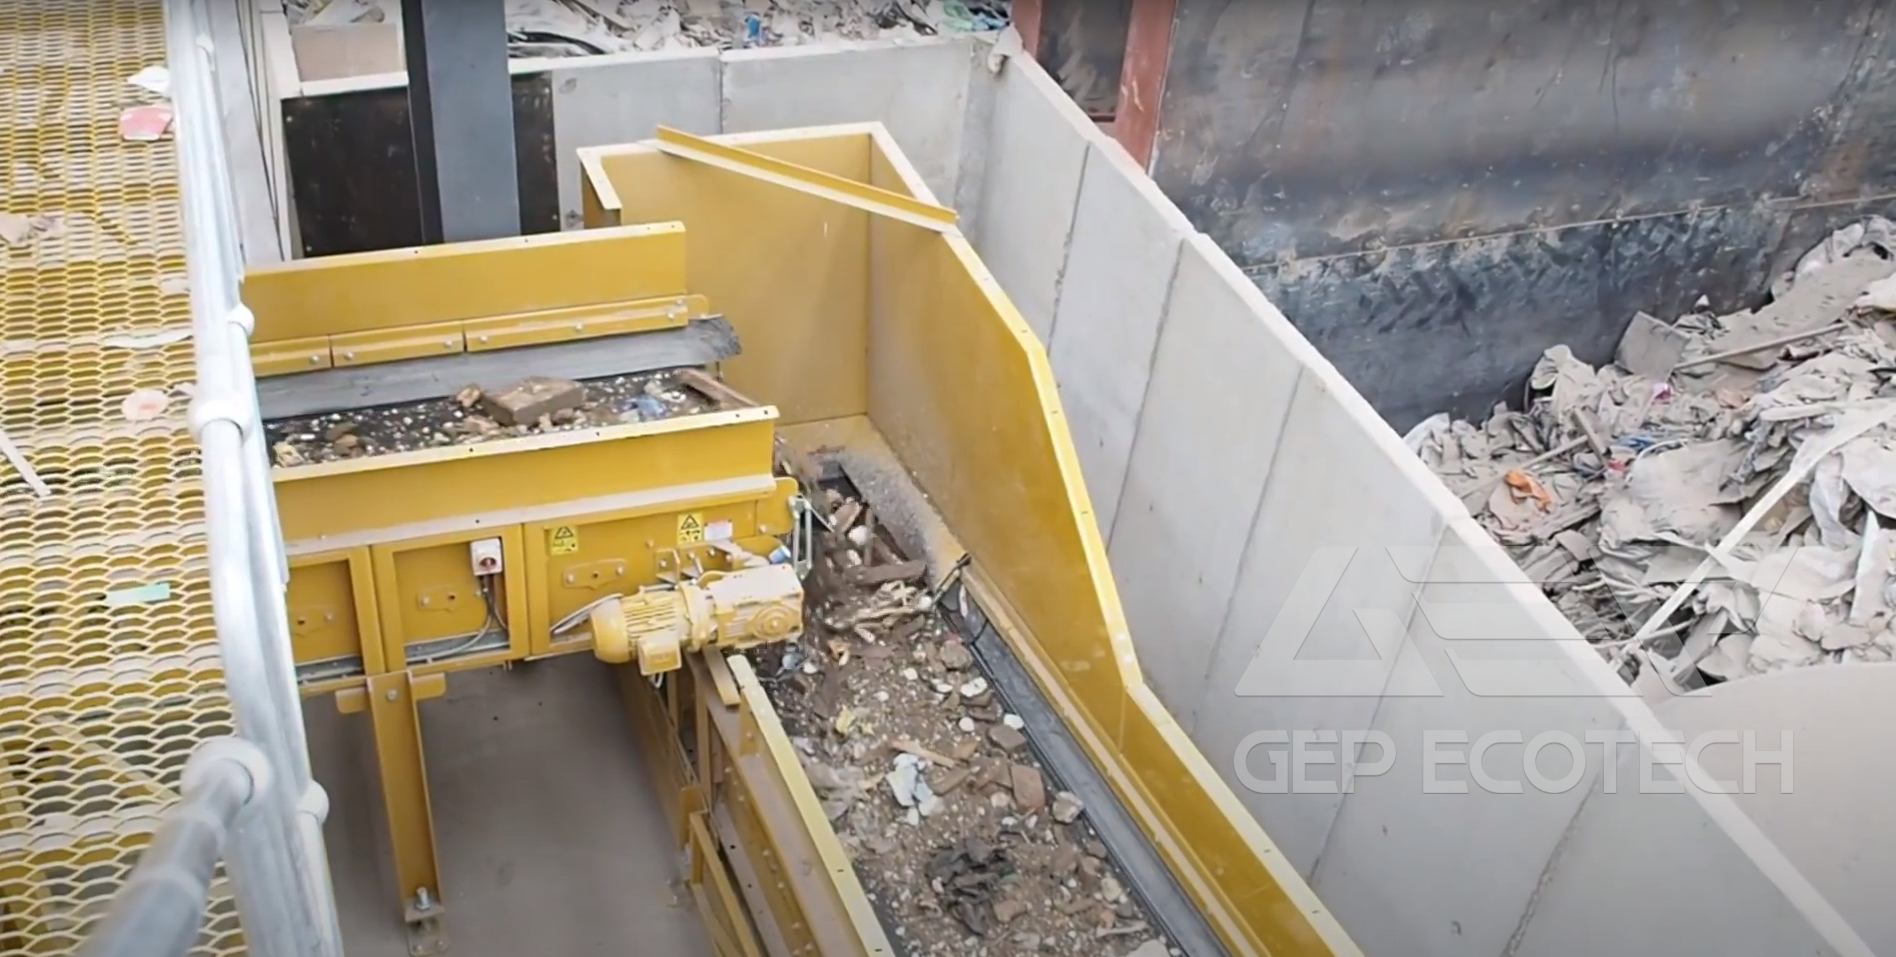 Construction Waste Management with GEP ECOTECH's Comprehensive Crushing, Sorting, and Recycling Solutions